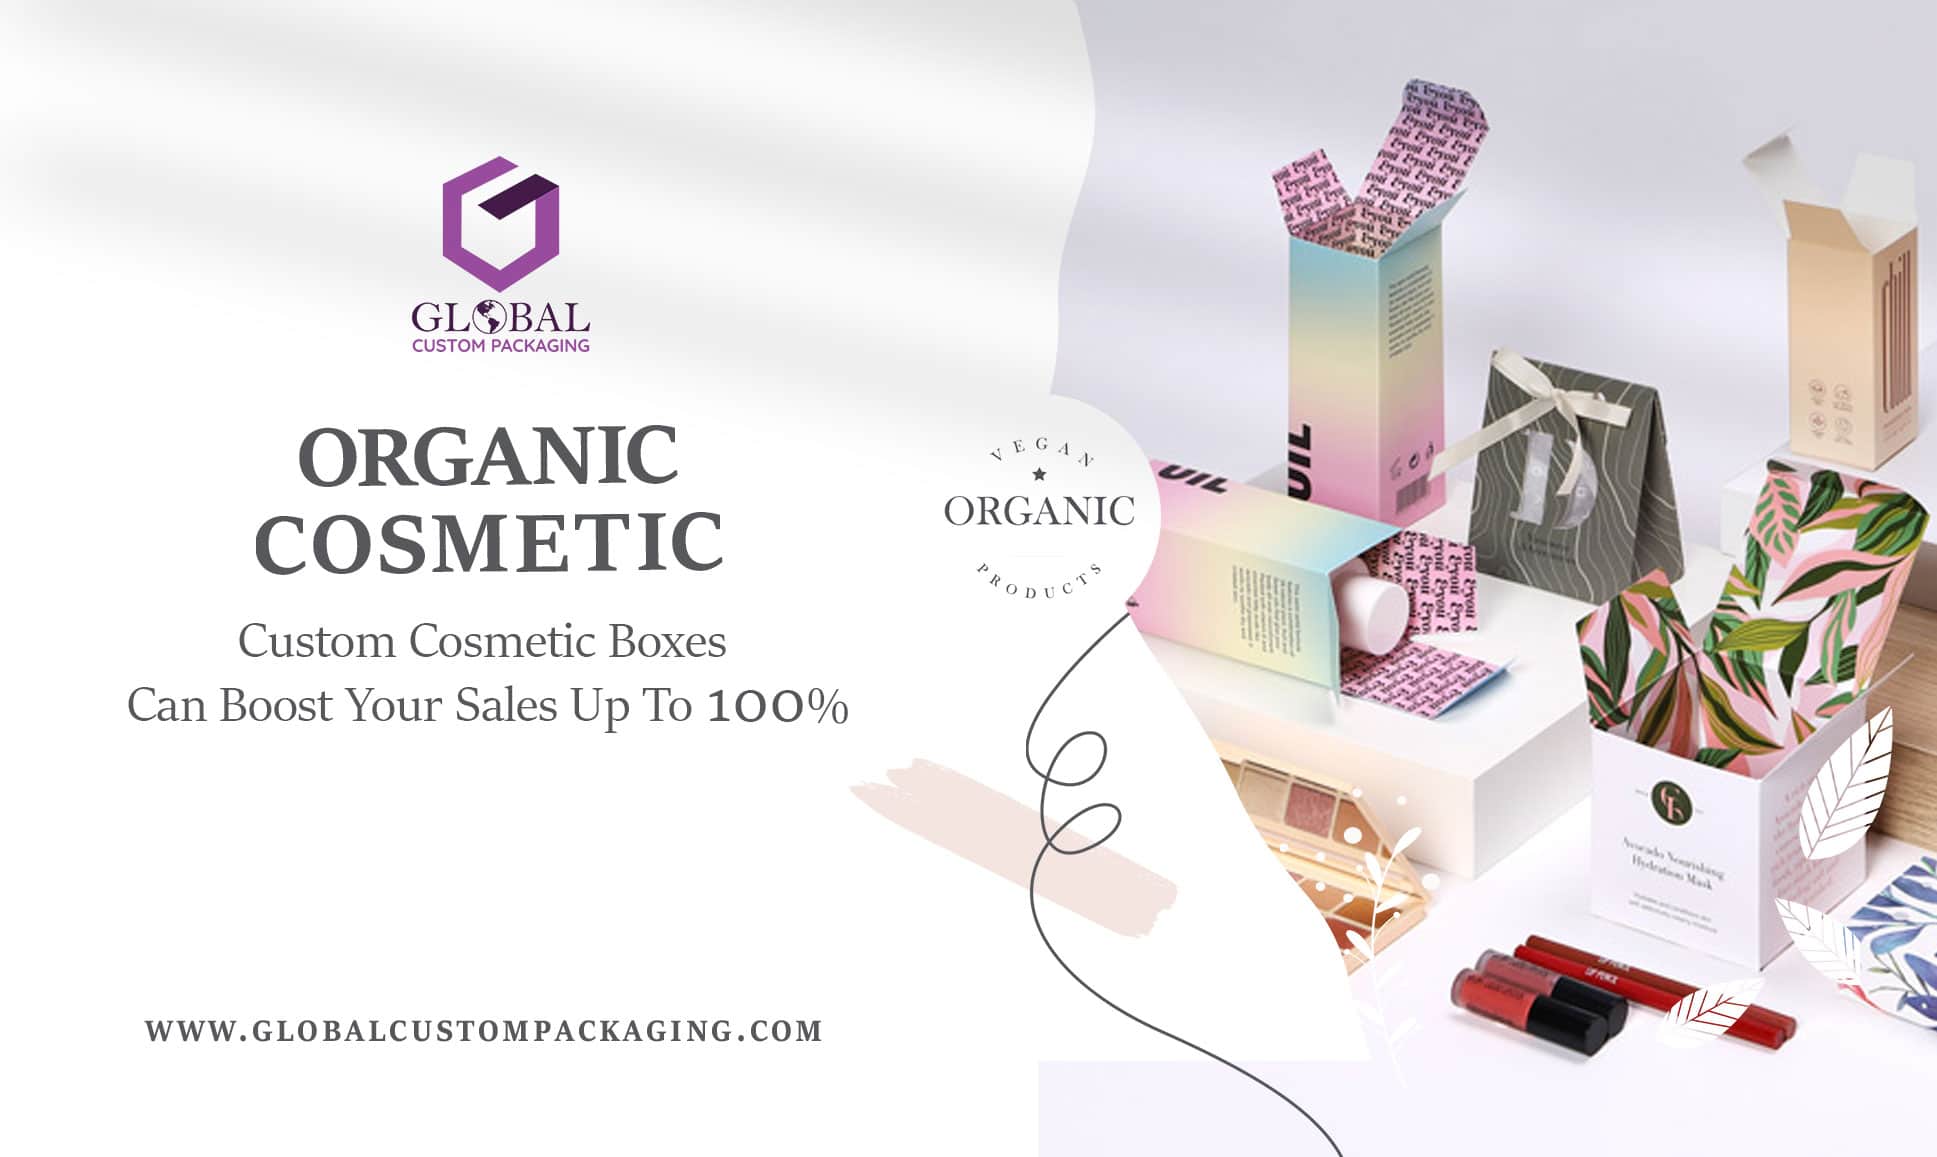 Custom Cosmetic boxes can boost your sales up to 100%